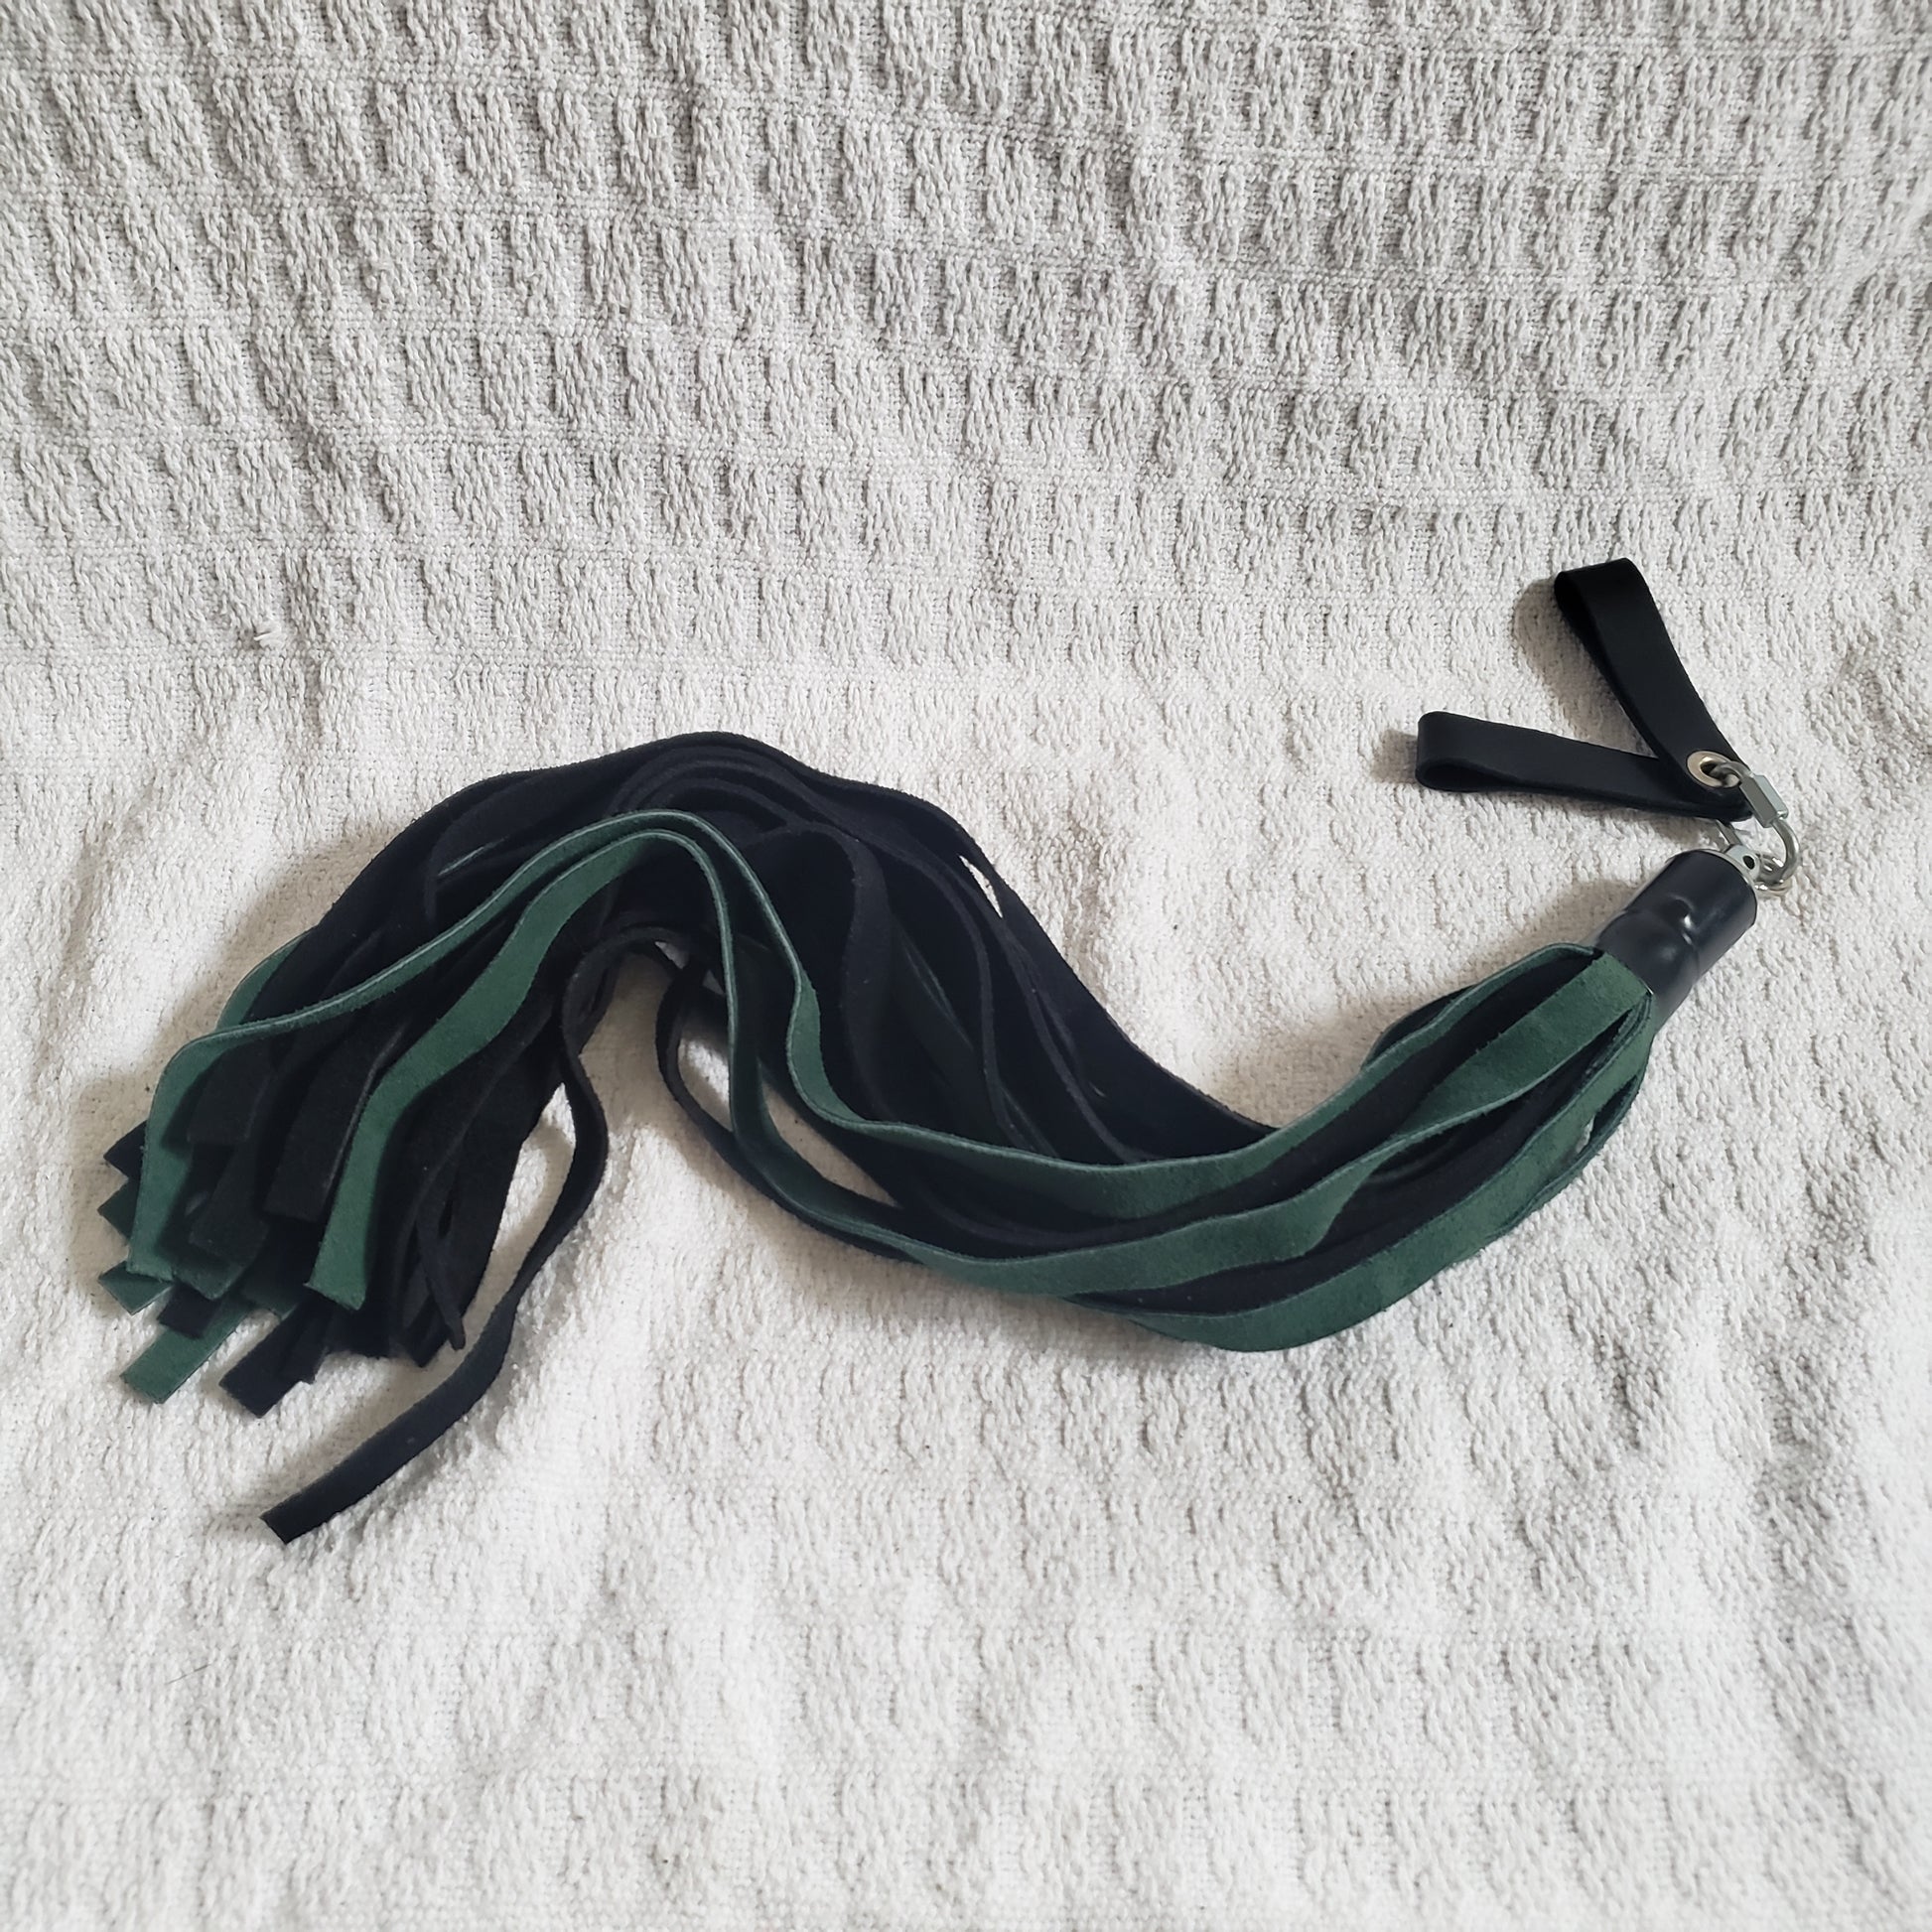 The green and black suede finger loop flogger.